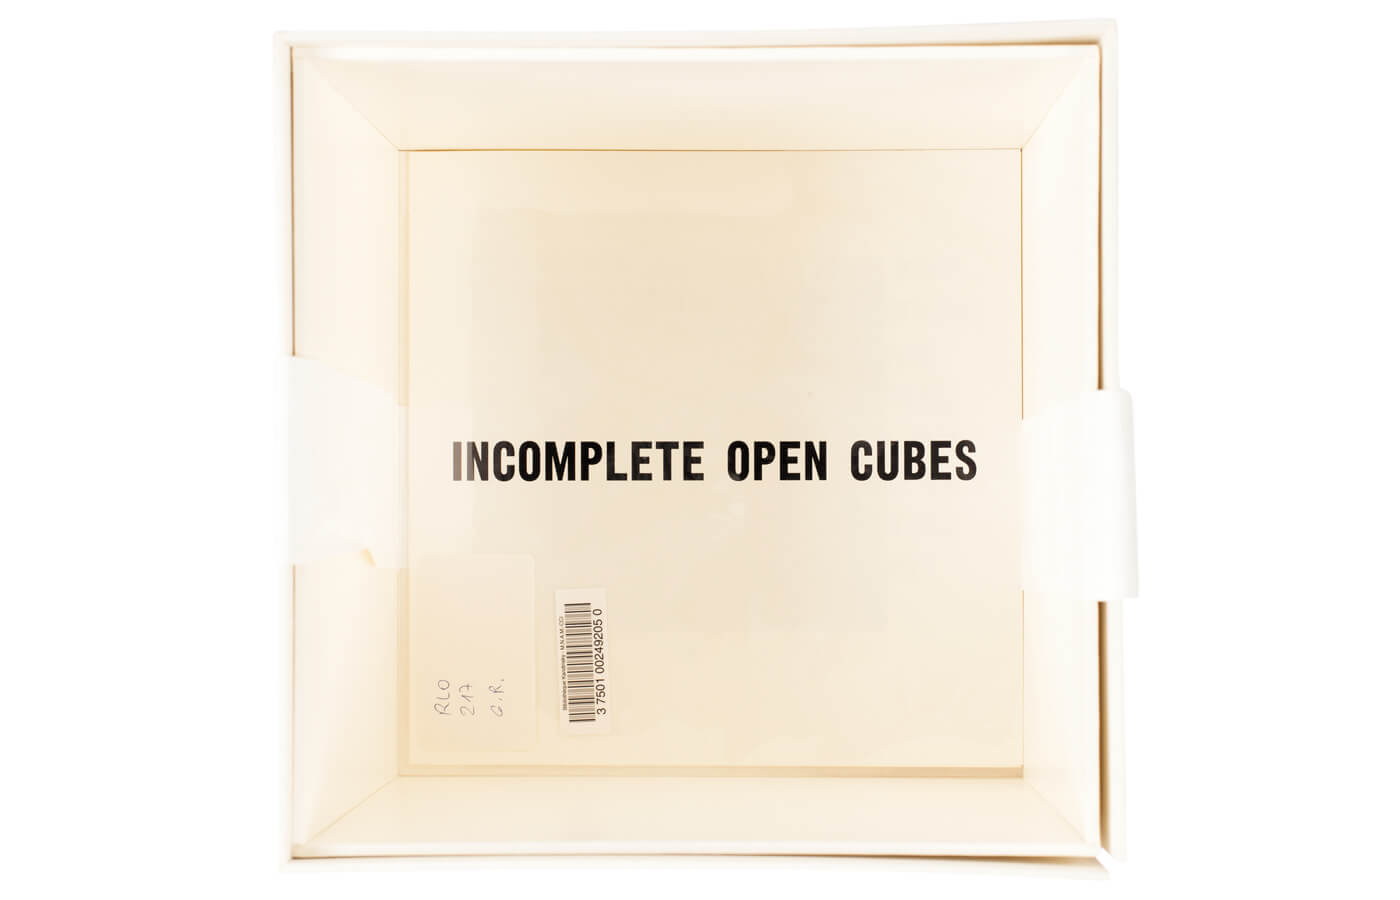 Incomplete Open Cubes